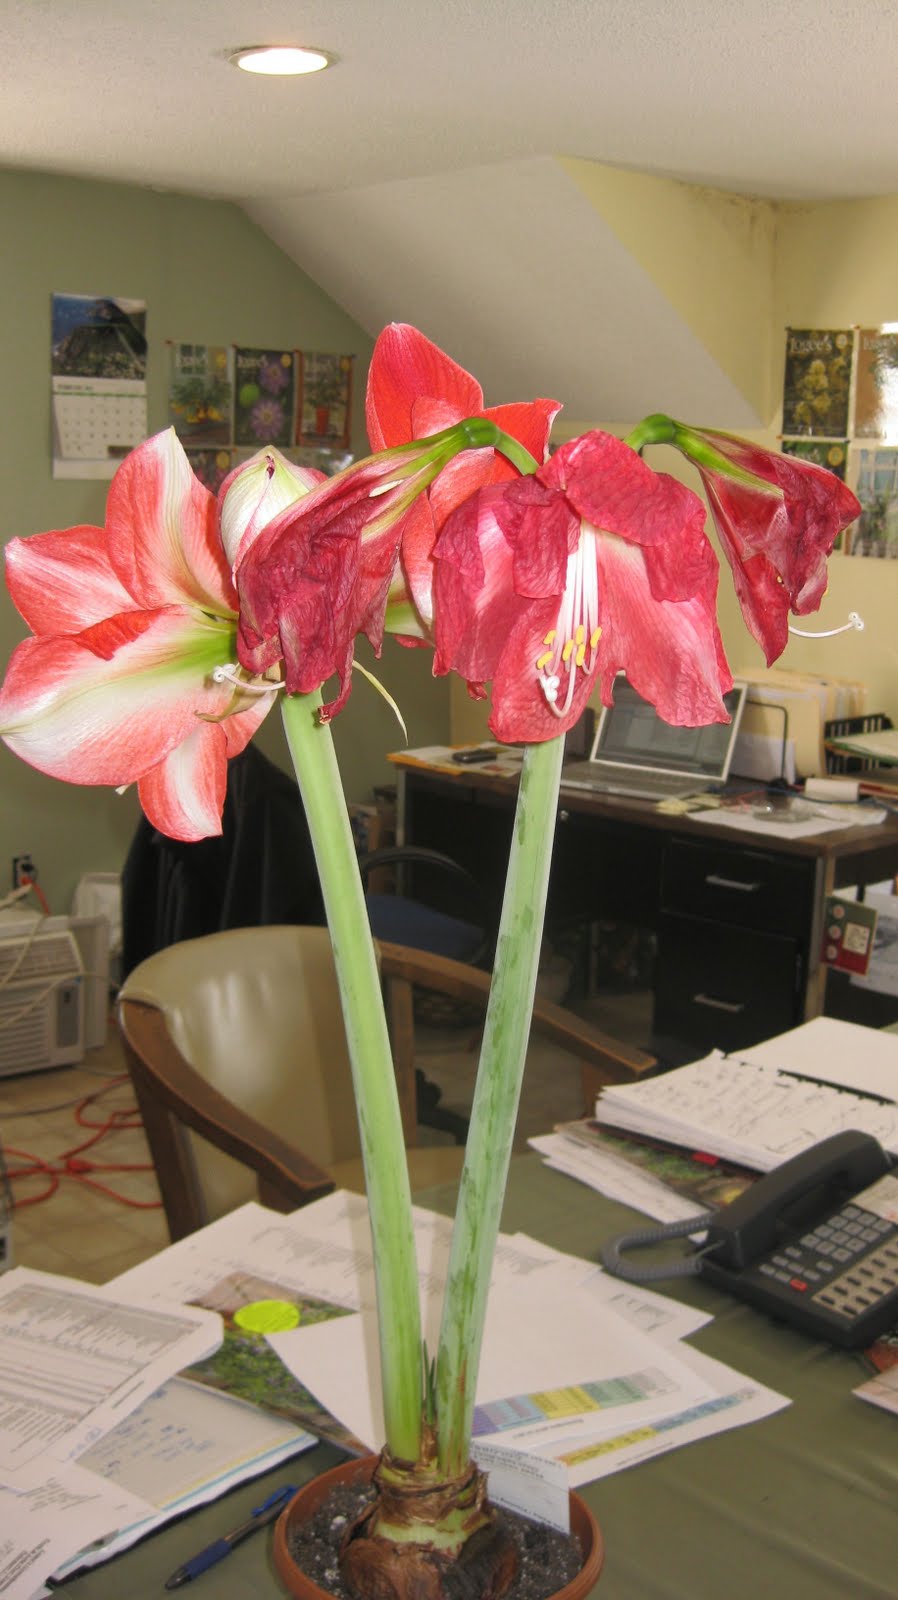 Amaryllis in our office that need plant care attention